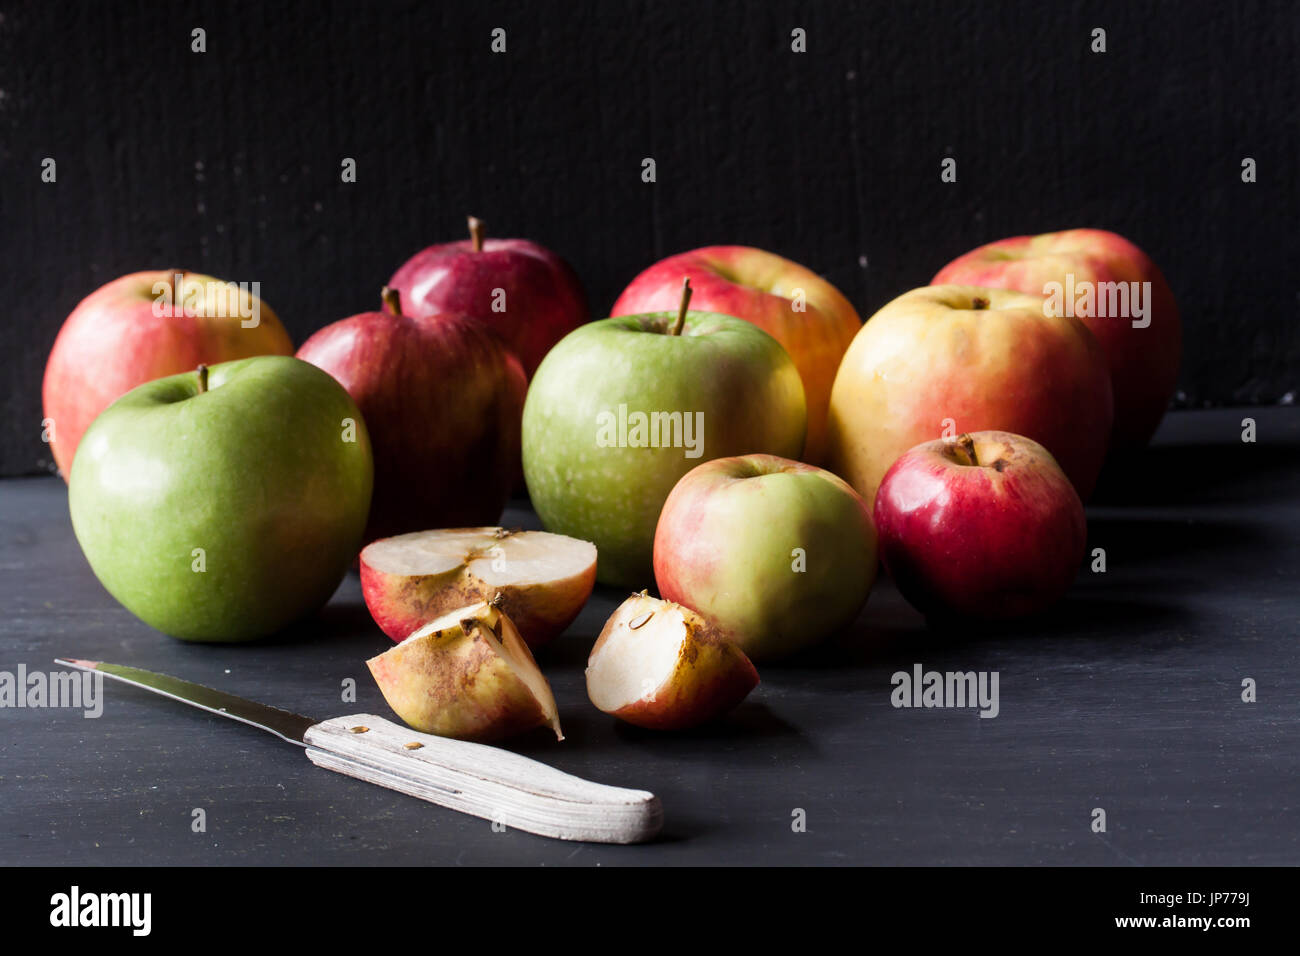 red and green apples on a black background Stock Photo